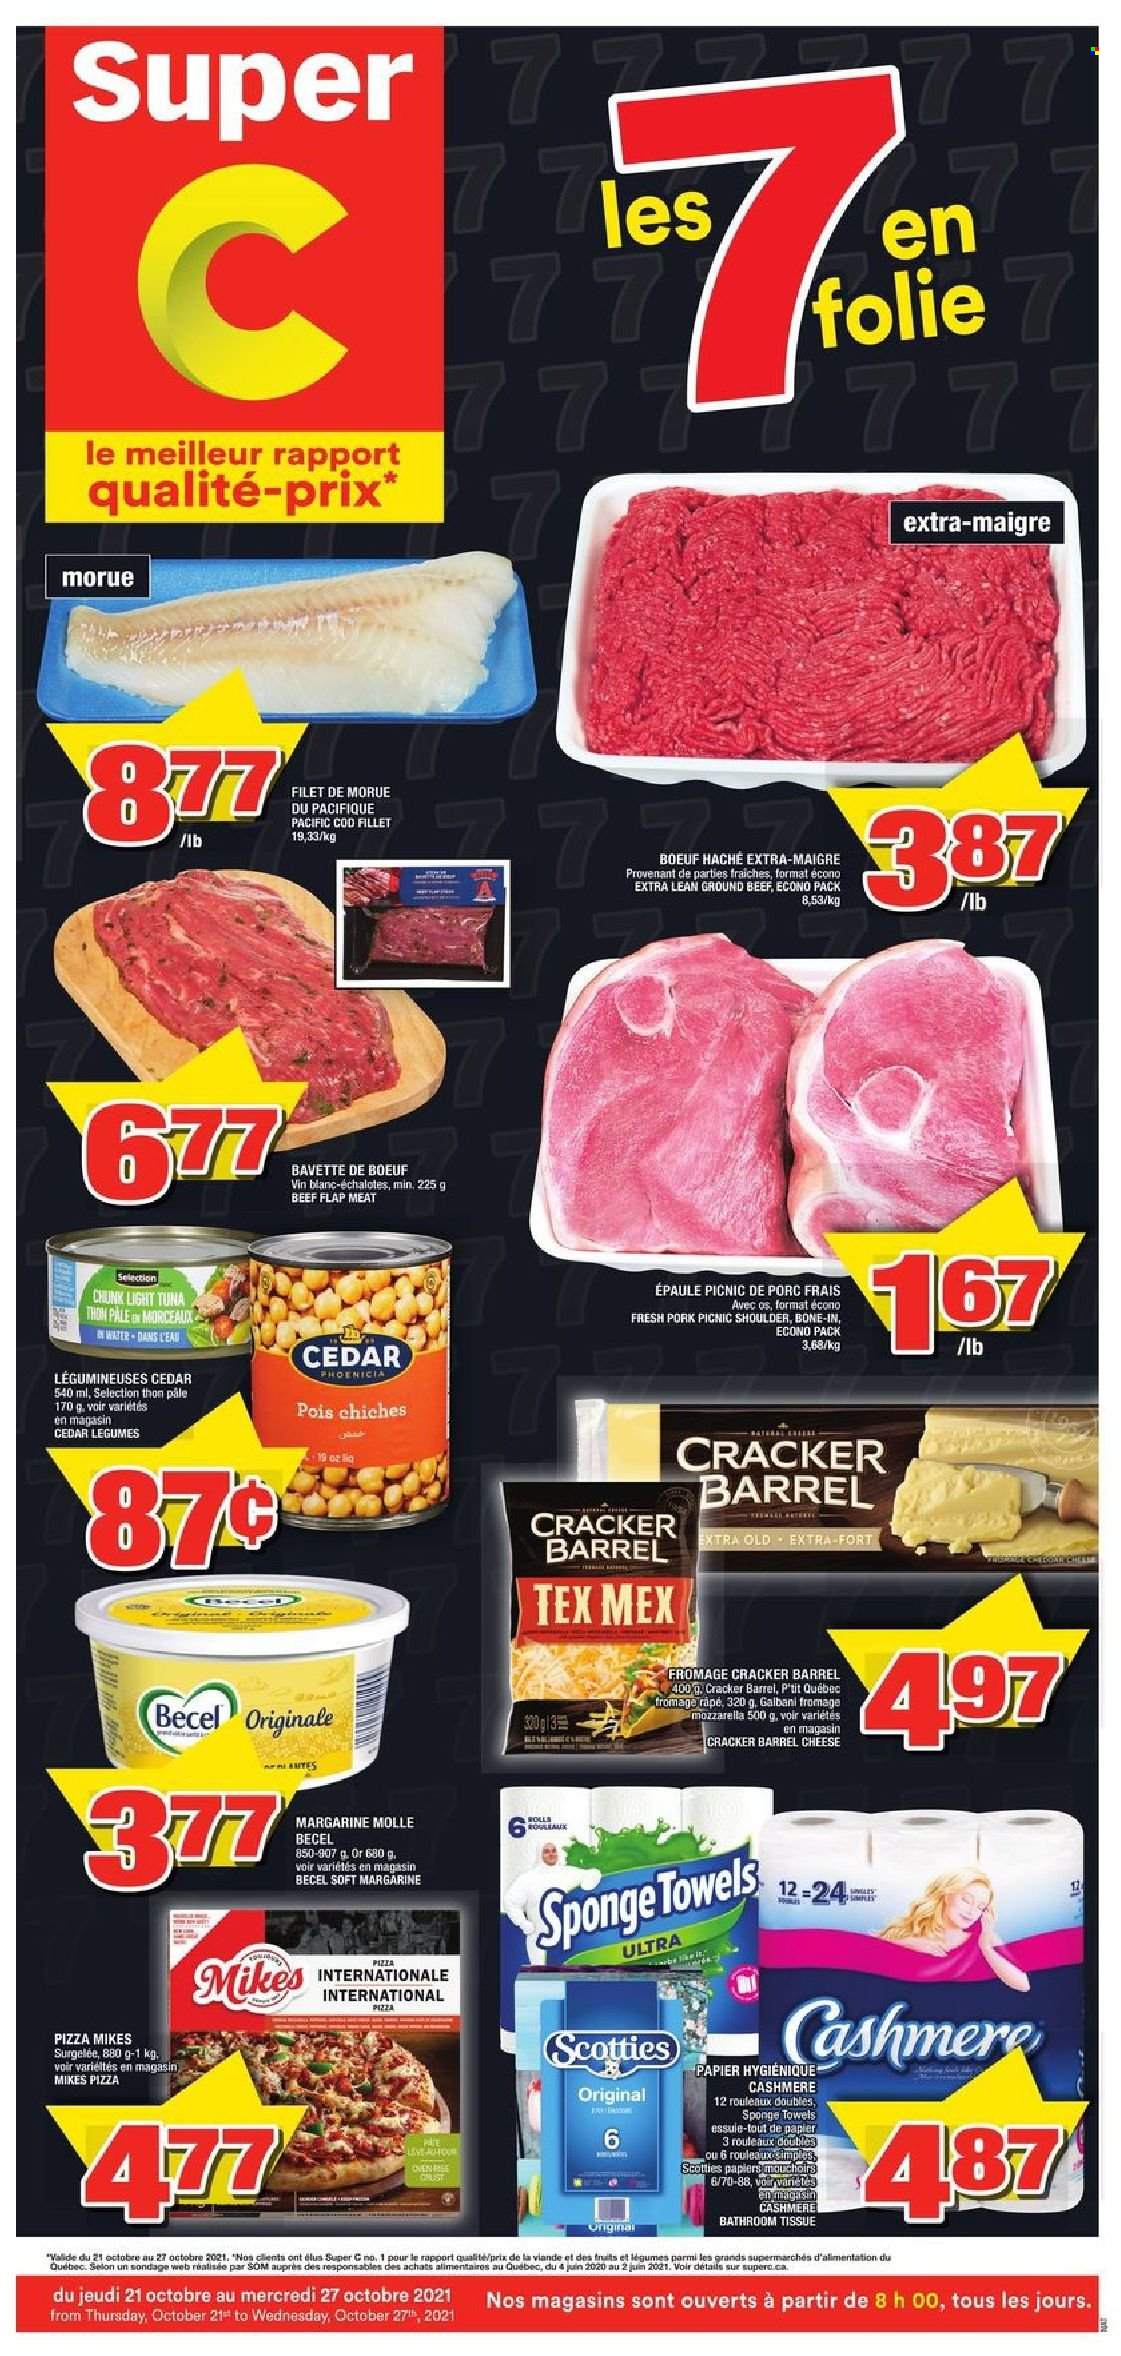 thumbnail - Super C Flyer - October 21, 2021 - October 27, 2021 - Sales products - cod, tuna, pizza, Galbani, margarine, crackers, light tuna, beef meat, ground beef, bath tissue. Page 1.